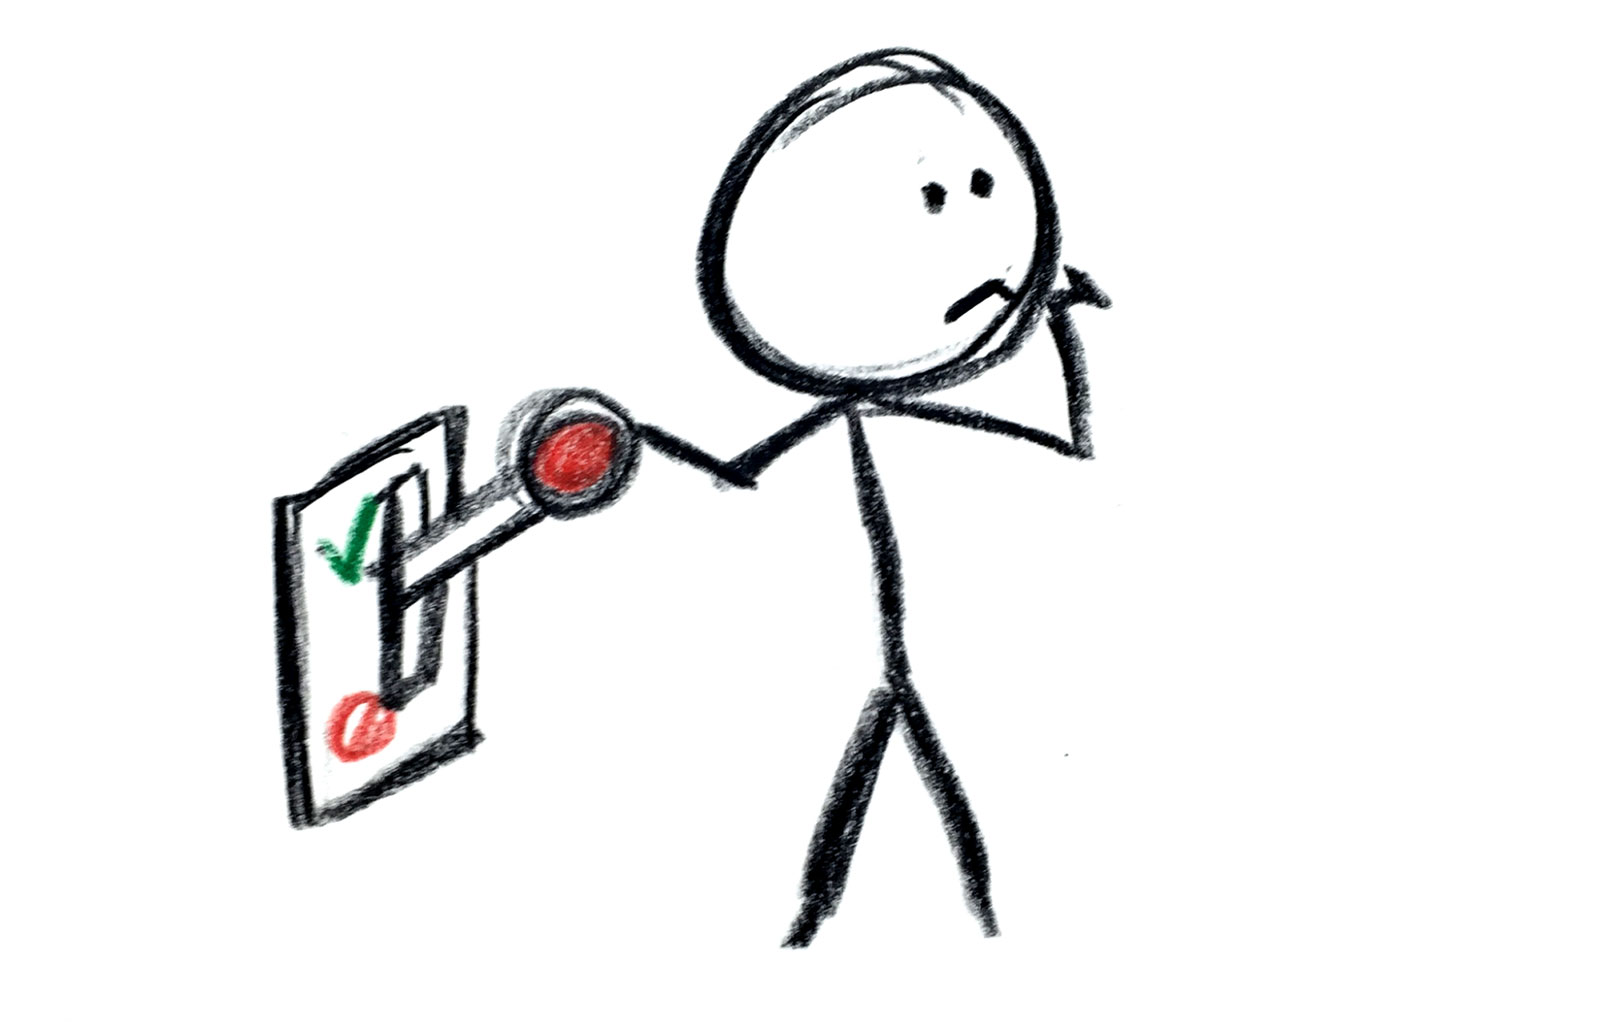 Stick figure holding onto a yes/no switch.